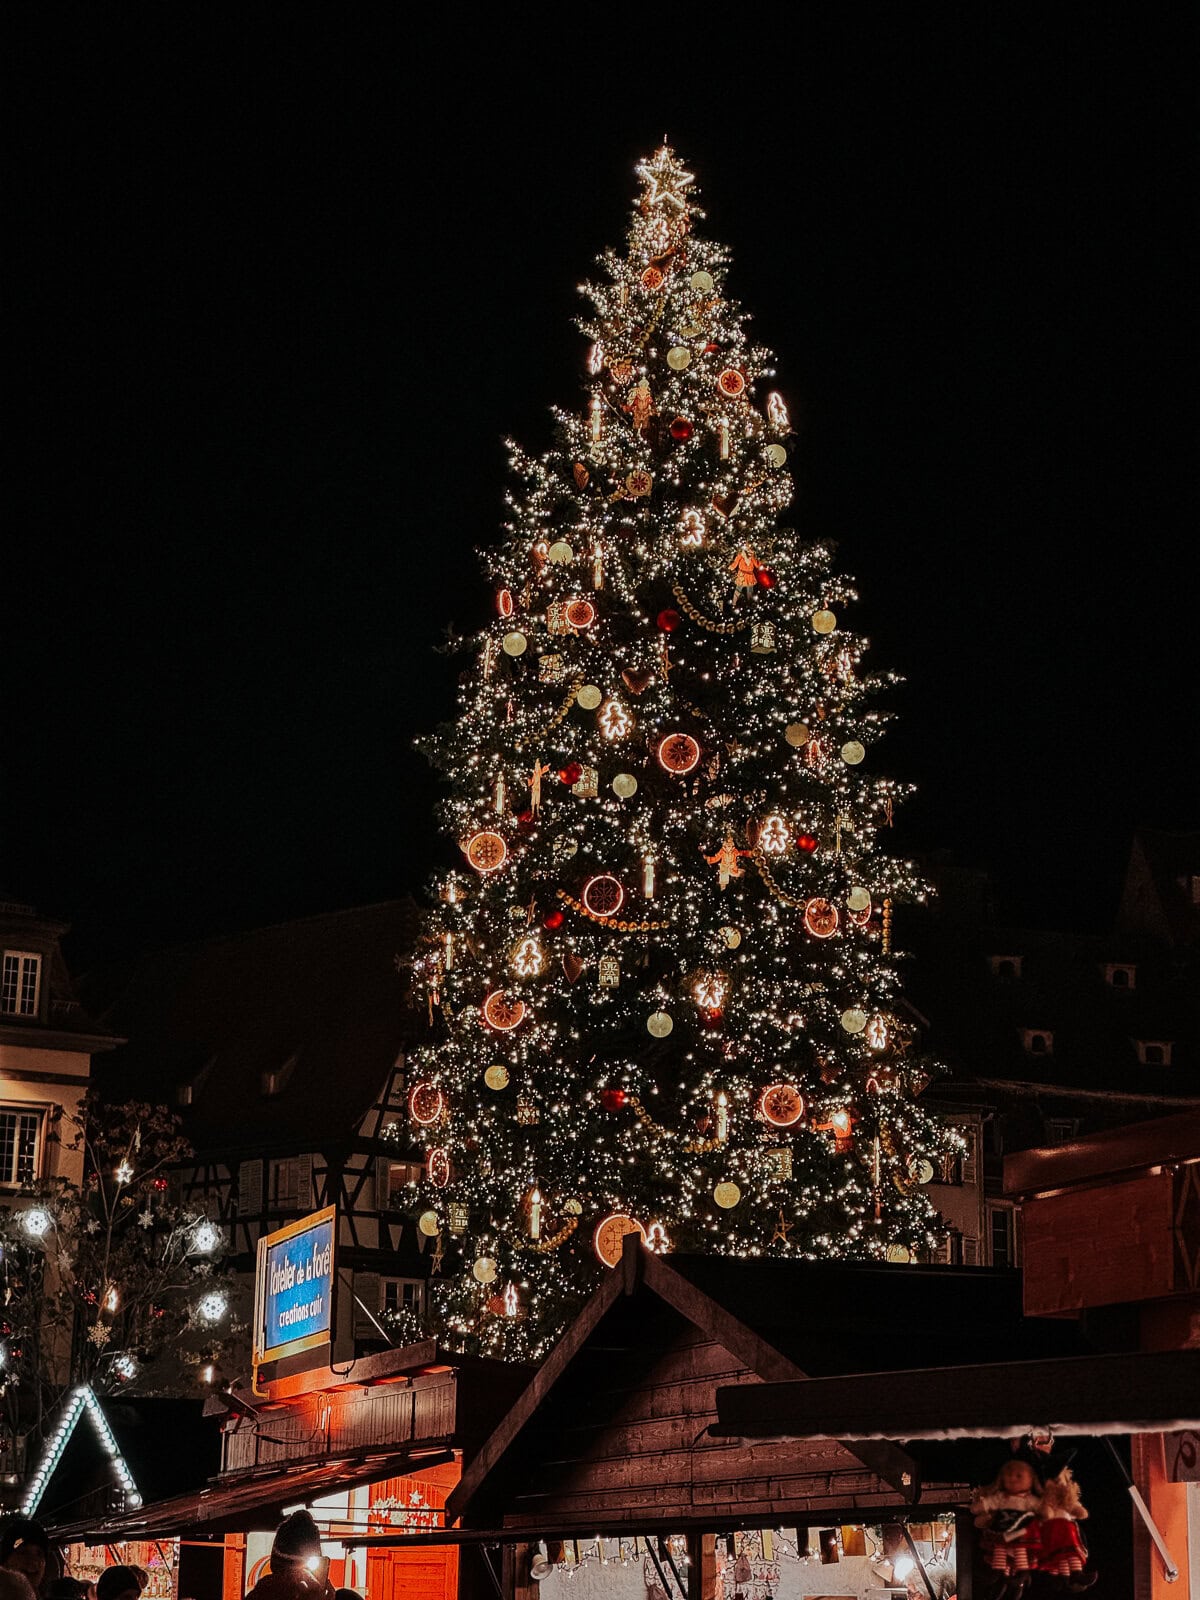 A large Christmas tree beautifully adorned with lights and ornaments, standing in a market square surrounded by half-timbered houses and festive stalls.